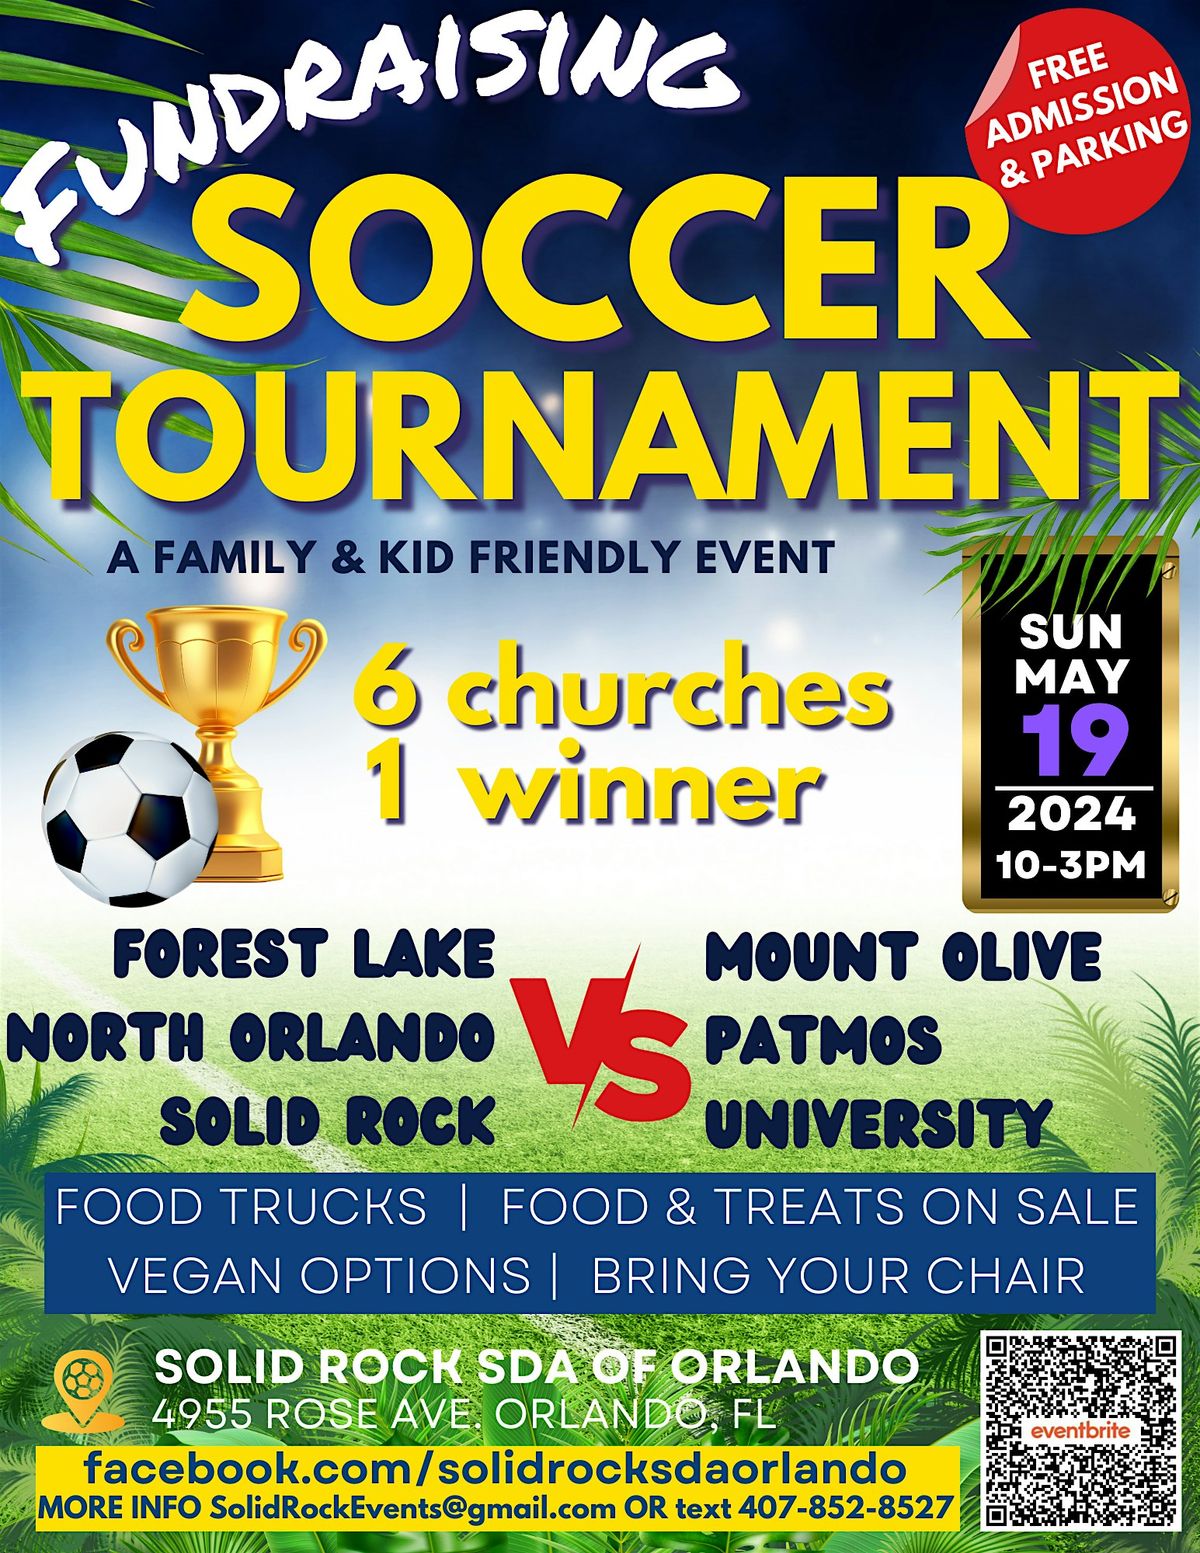 6 CHURCH SOCCER TOURNAMENT - Free Admission & Family Friendly, Food Trucks & More!!